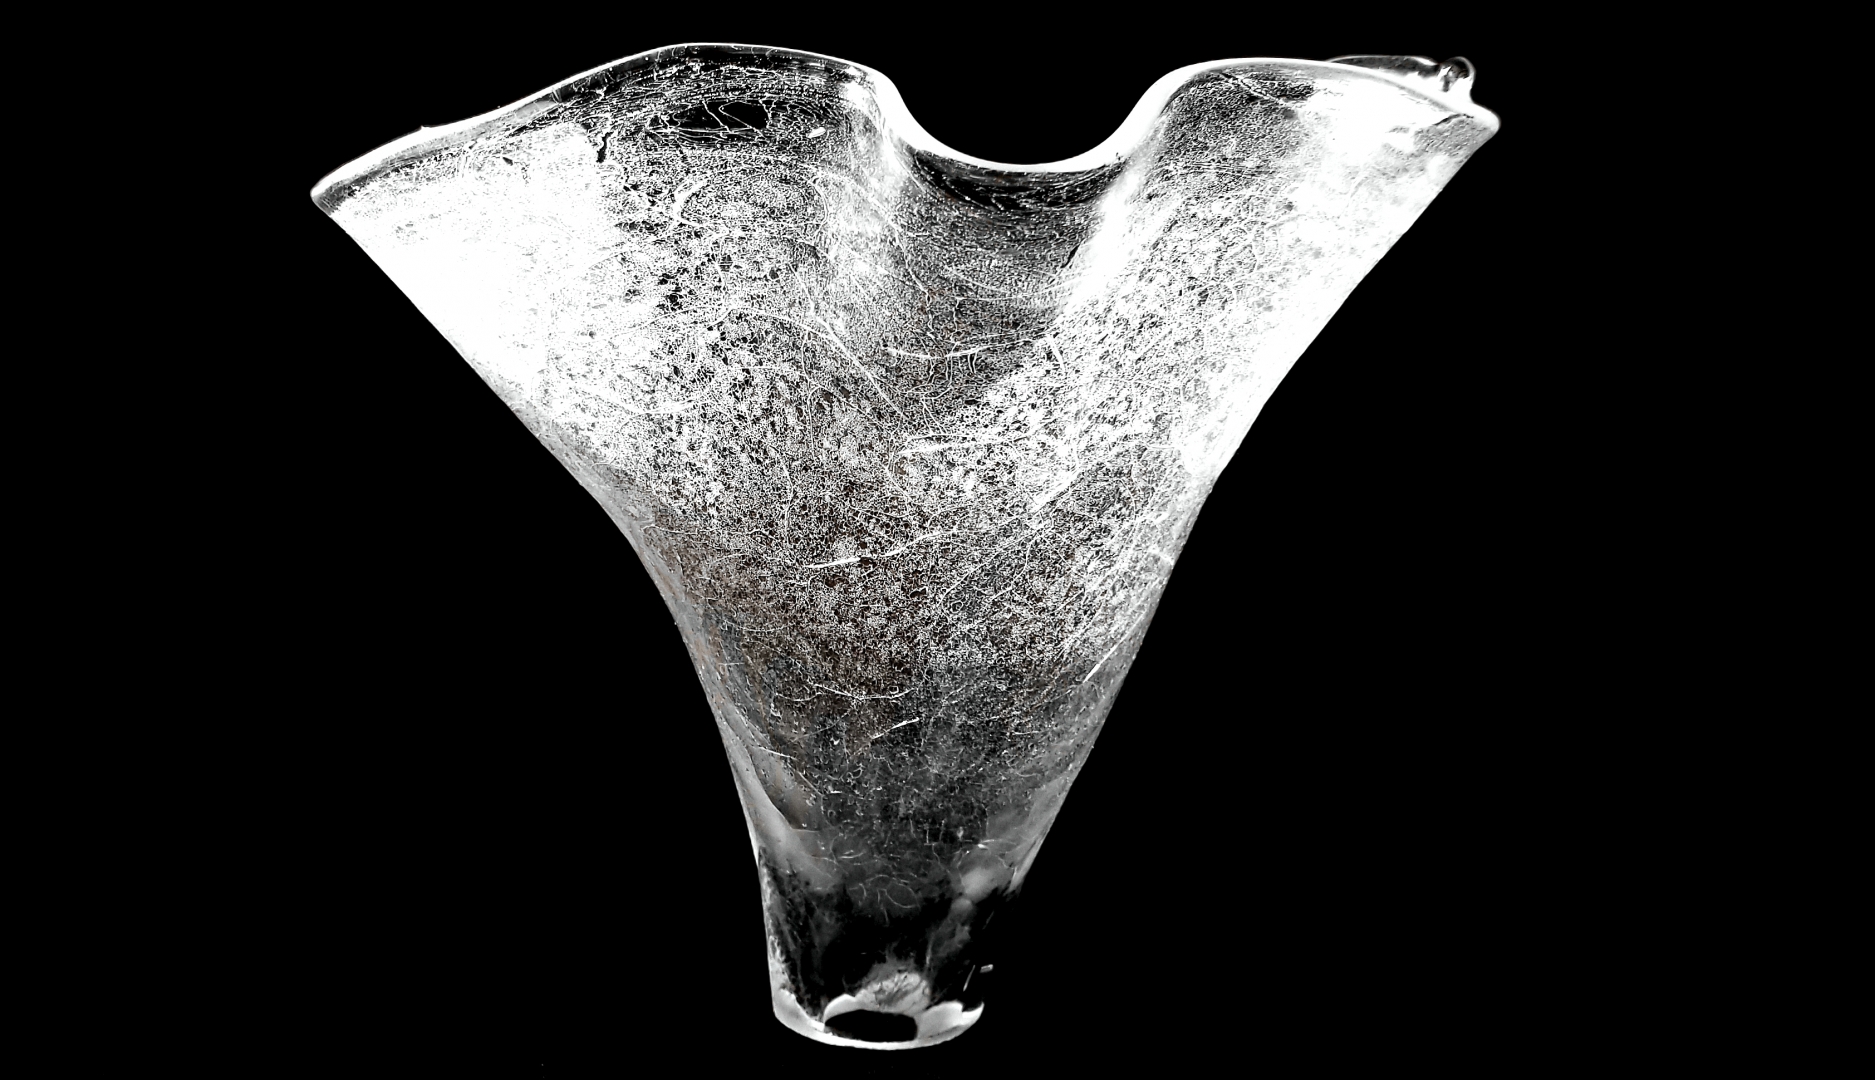 Rippled Vase With a Cracked Finish